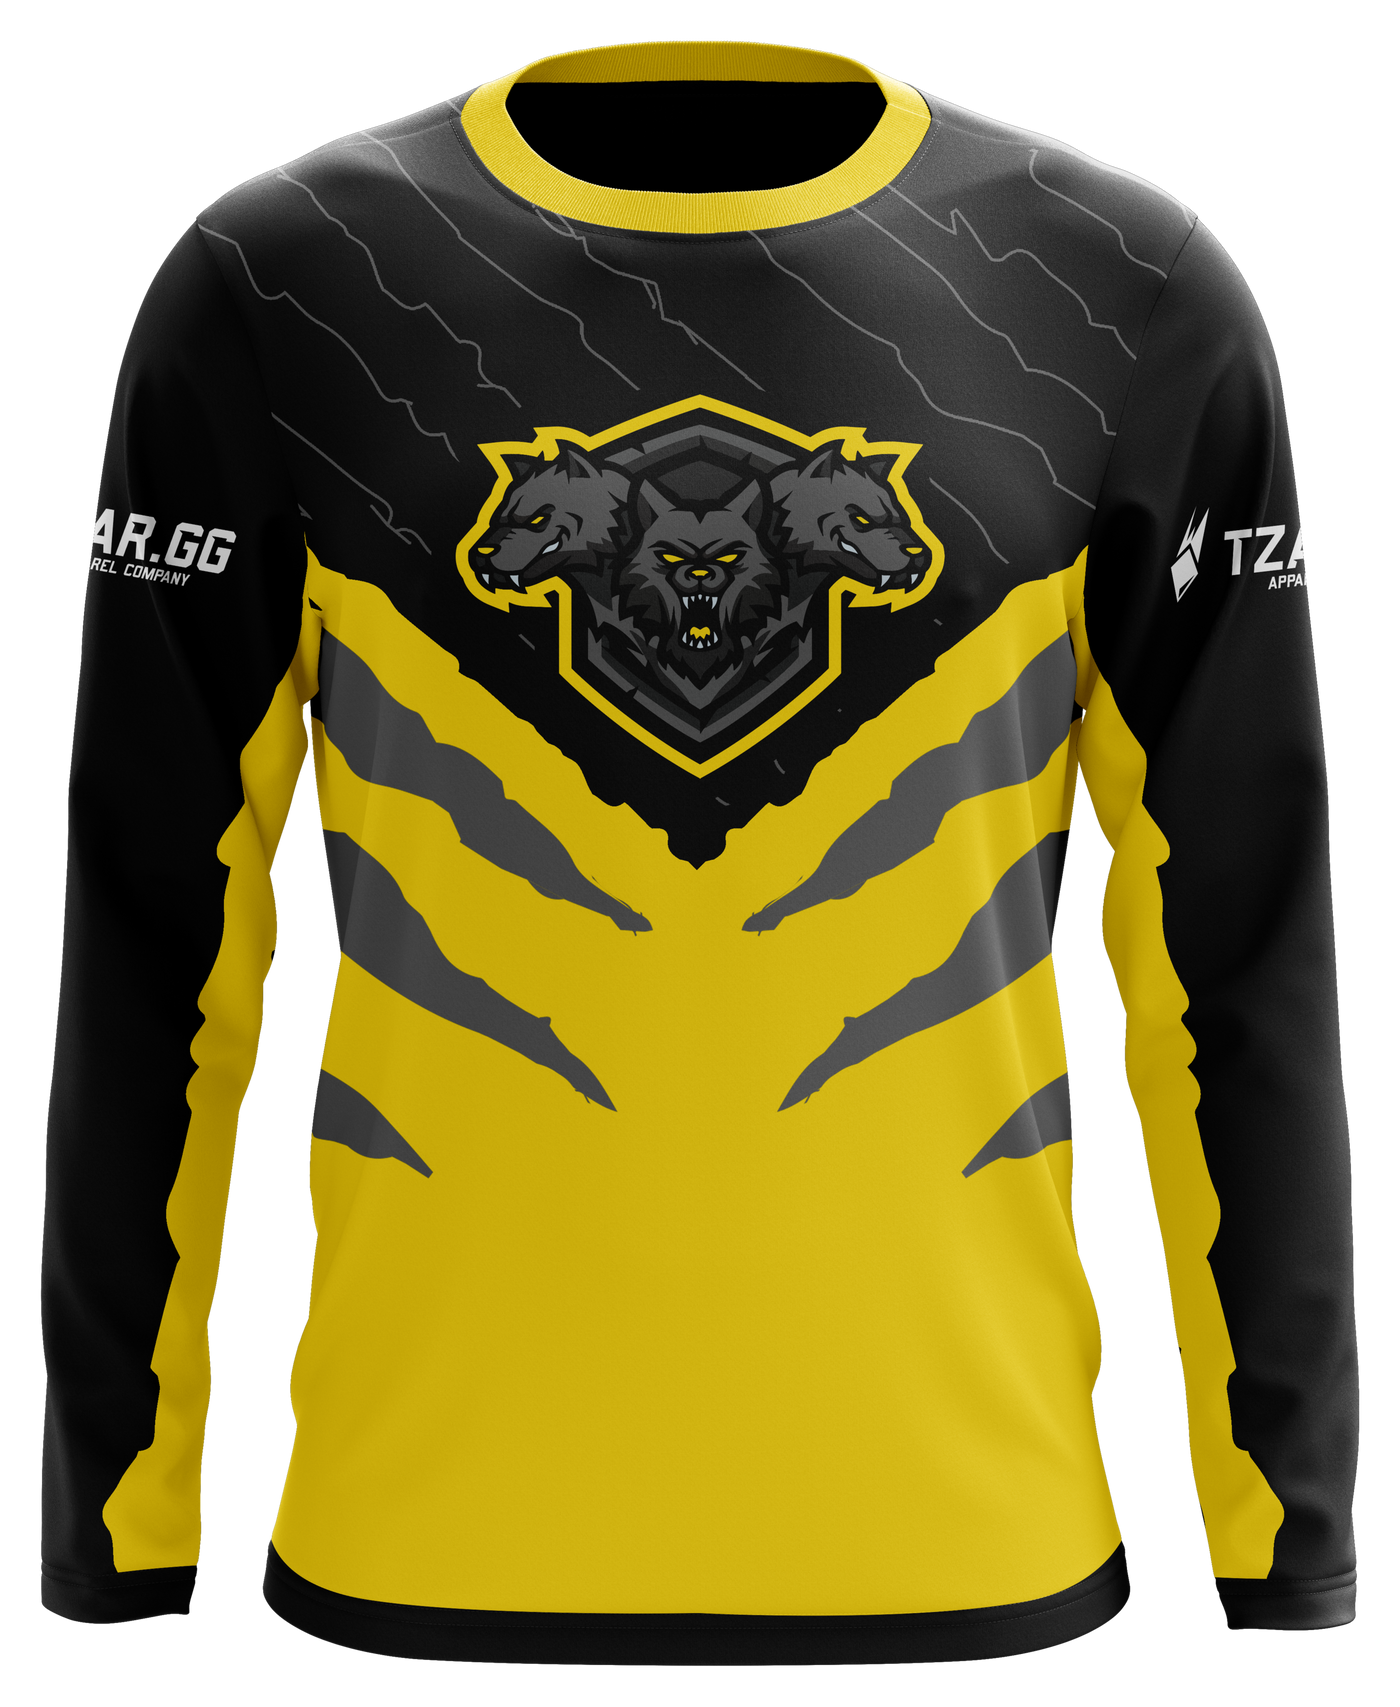 The Pack Long Sleeve Pro Jersey